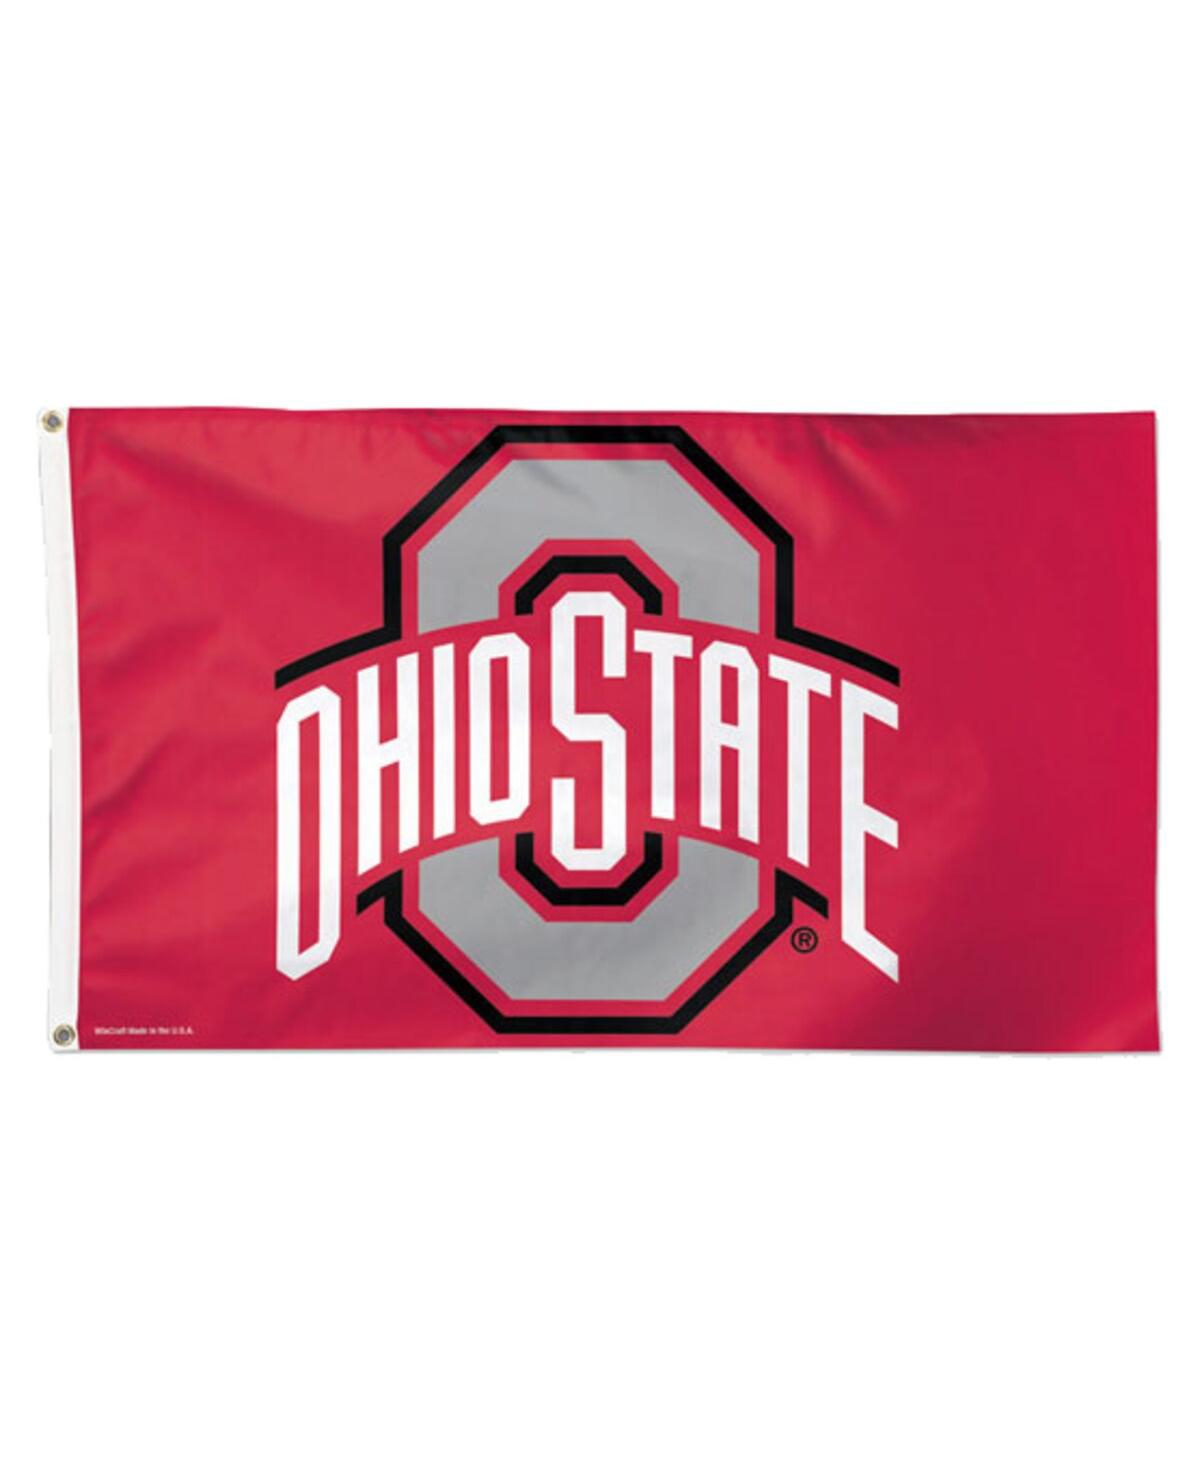 Ohio State Buckeyes Deluxe 3' x 5' Flag - Red